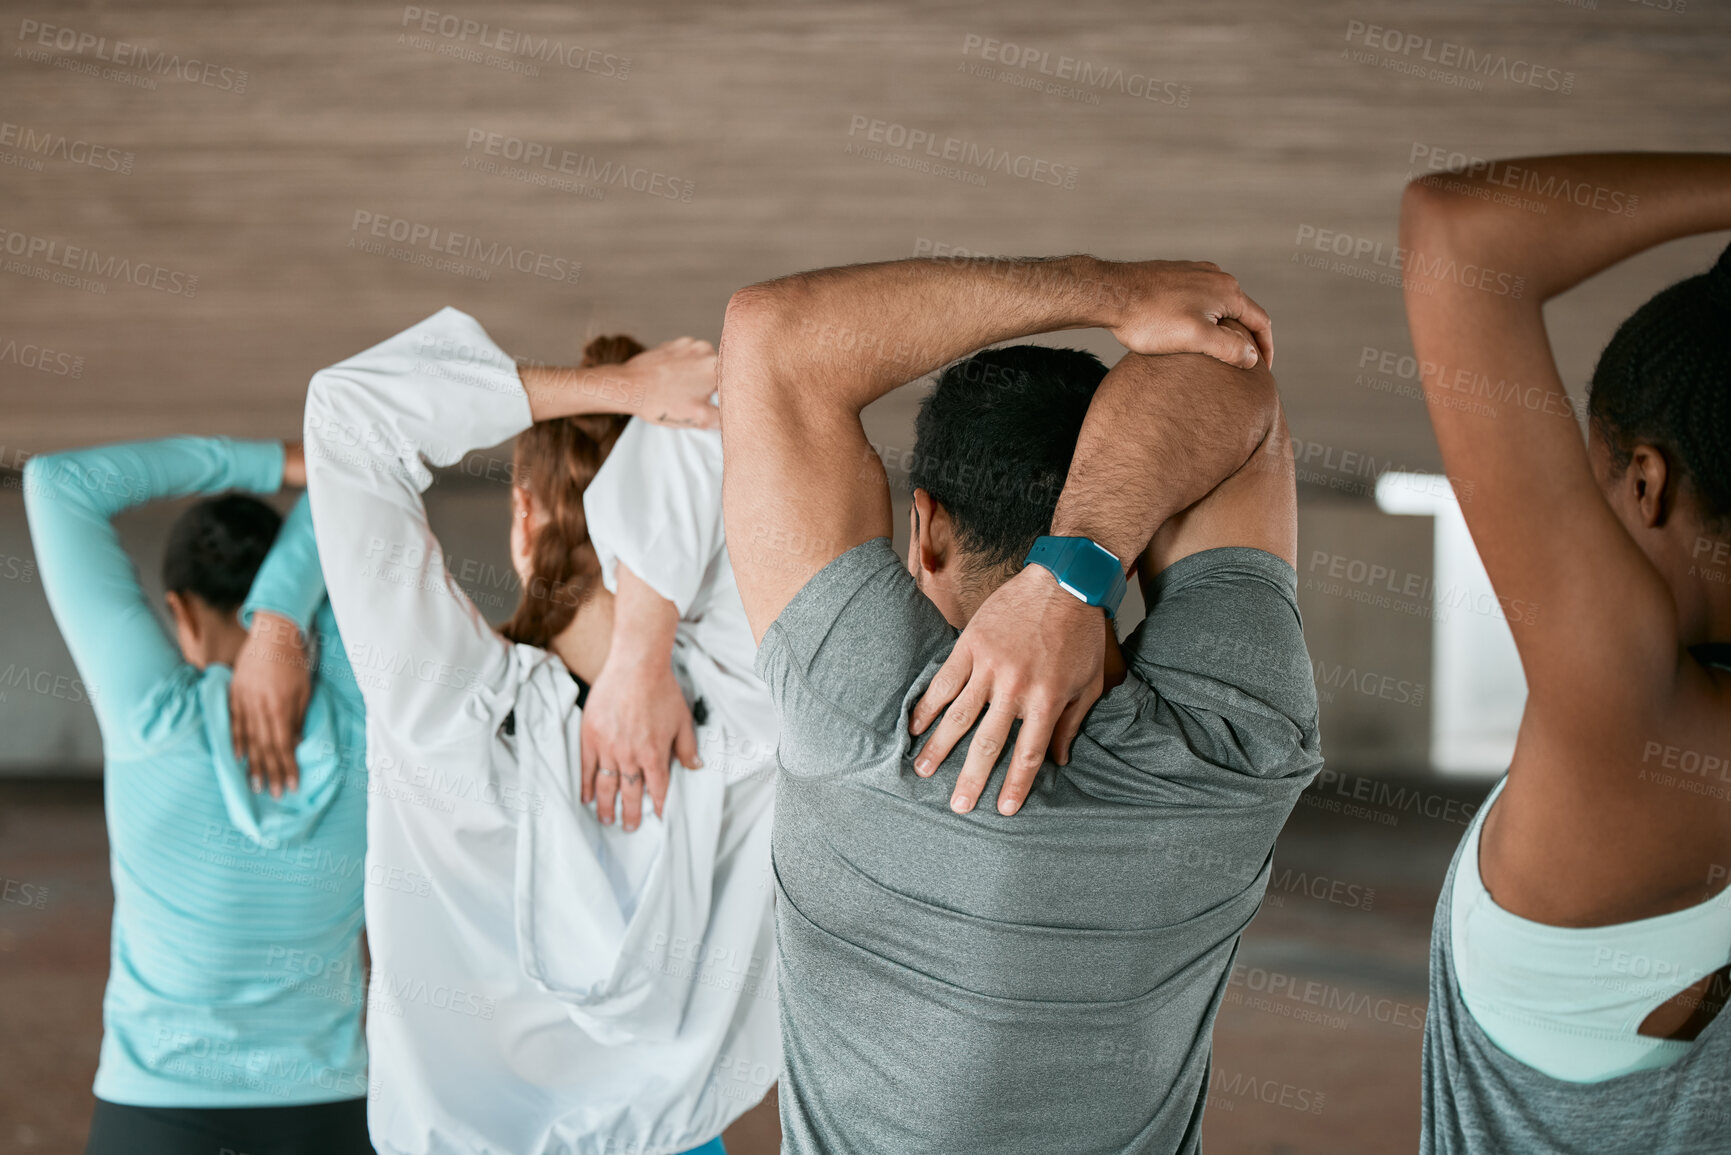 Buy stock photo Shot of a group of friends stretching their arms and shoulders together